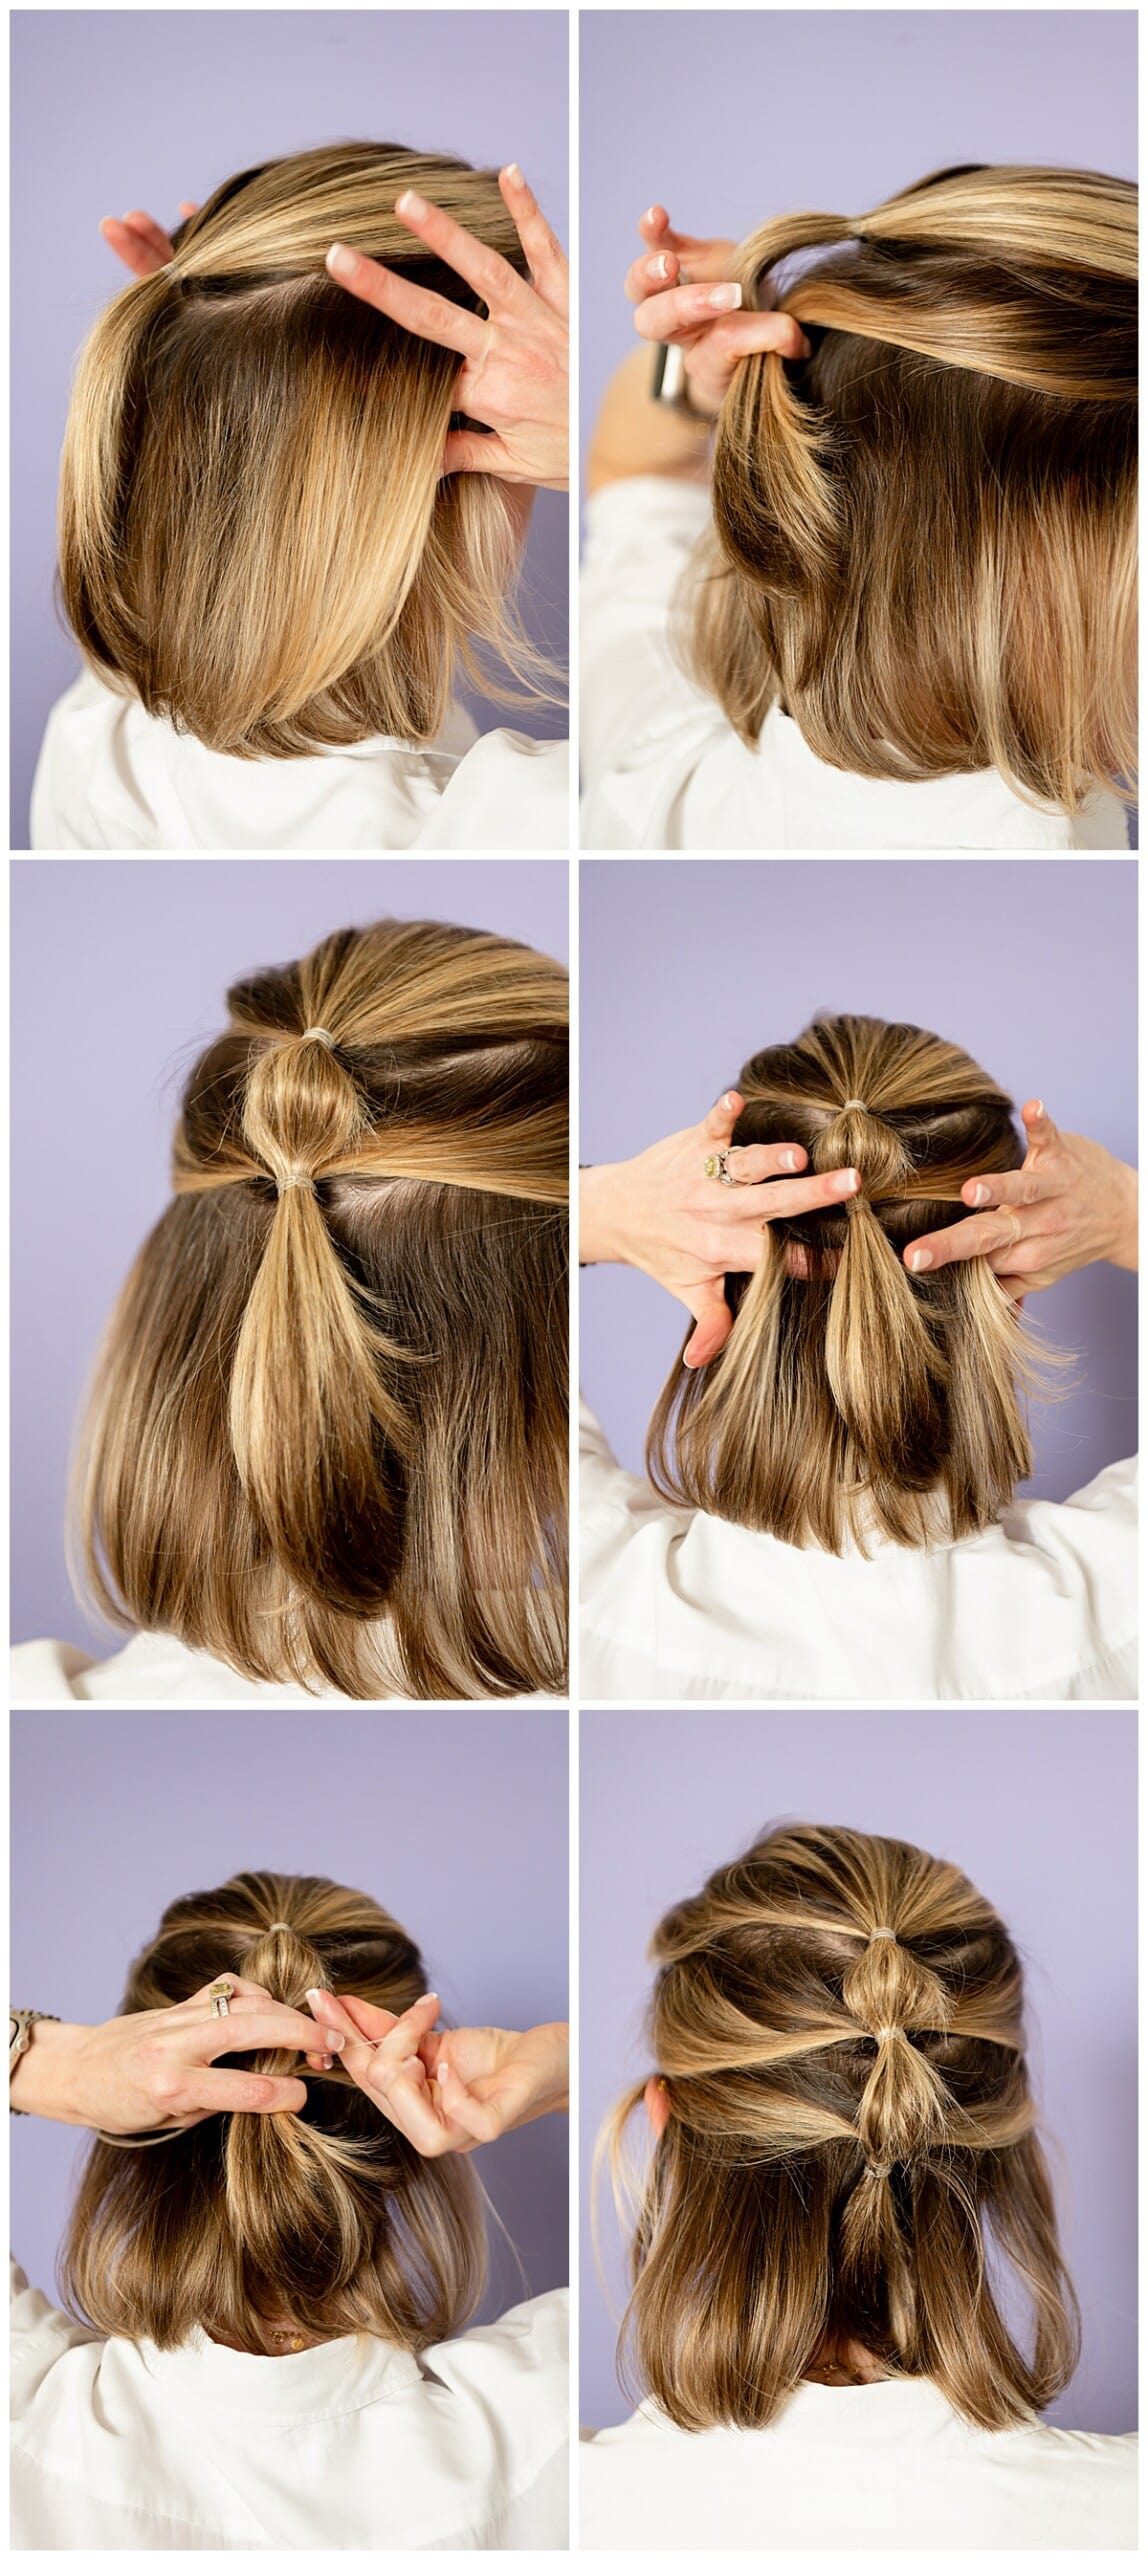 Picture tutorial on how to do a bubble braid with short hair.